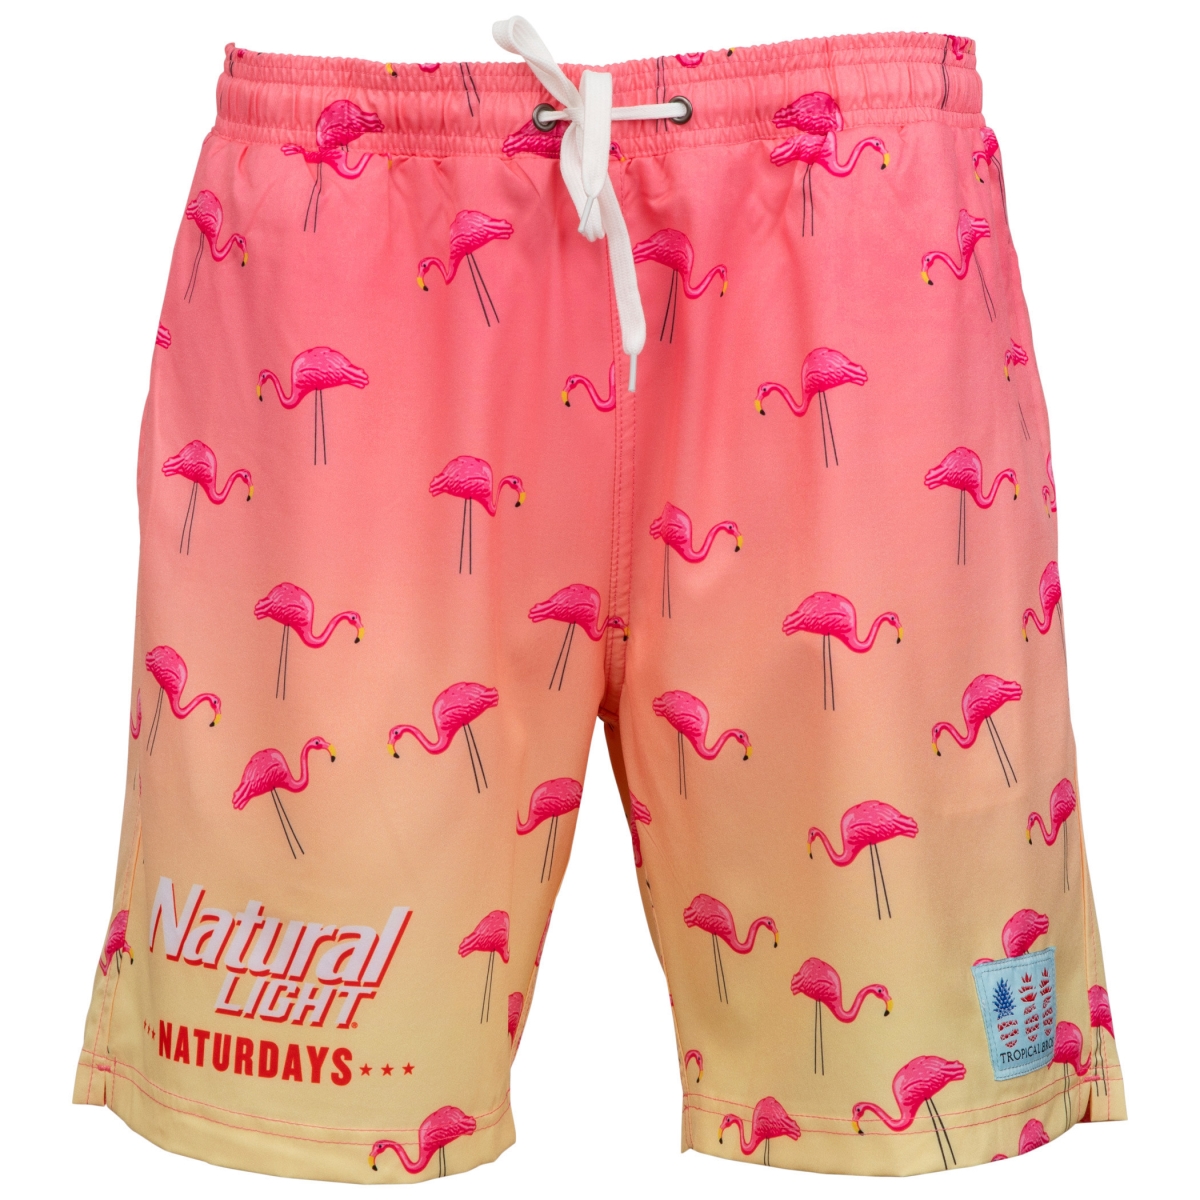 Picture of Natural Light 858386-large-36- Naturdays Natural Light Flamingo Swimsuit - Large - 36-38